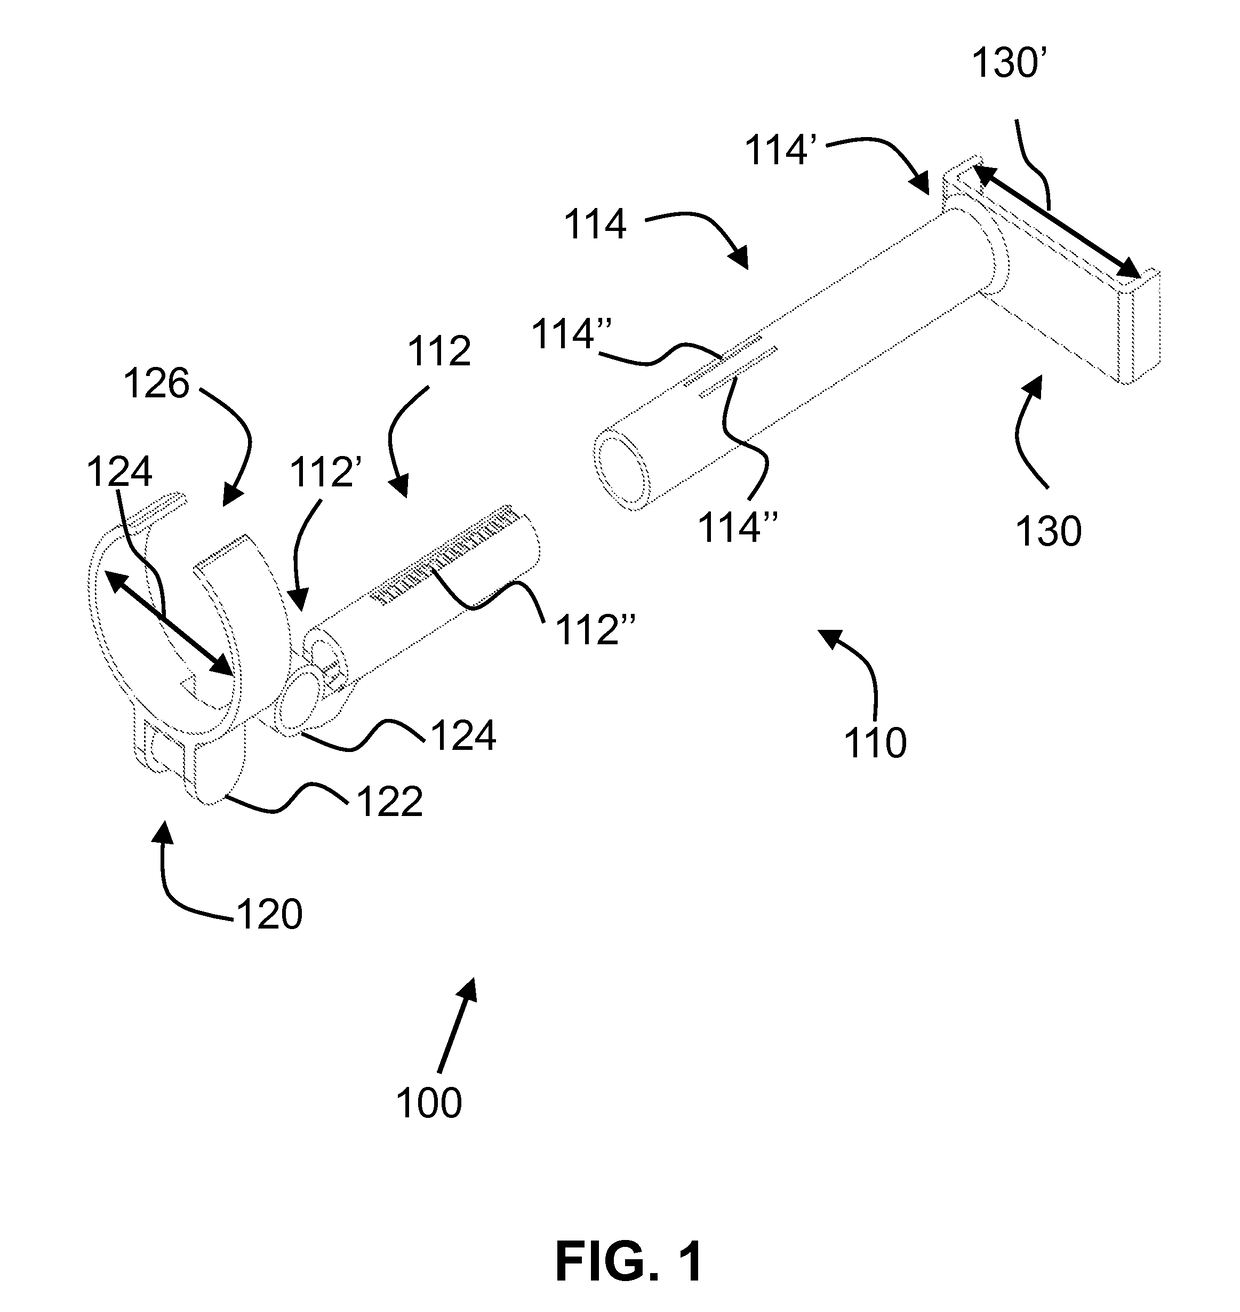 Modular lens adapters for mobile anterior and posterior segment ophthalmoscopy